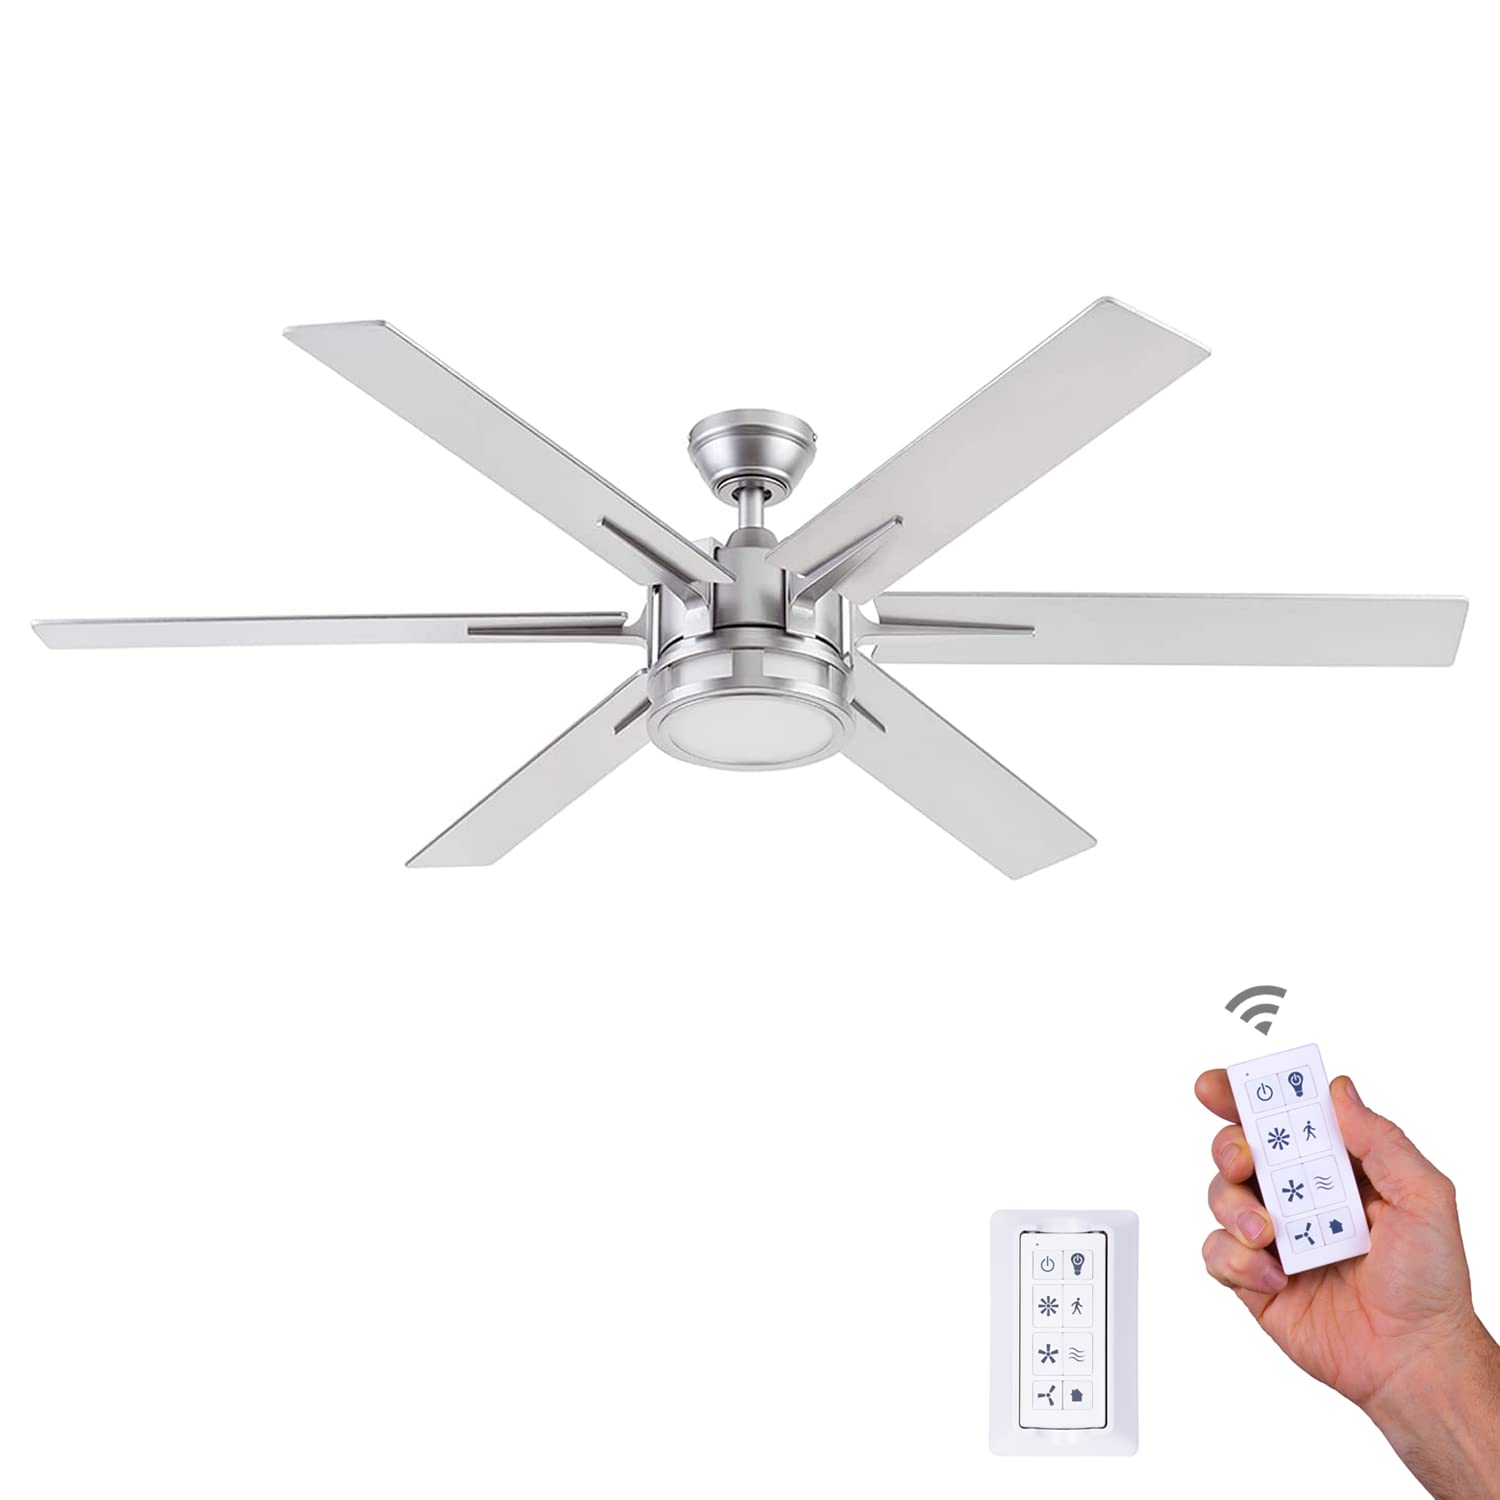 Honeywell Ceiling Fans Kaliza, 56 Inch Indoor Modern LED Ceiling Fan with Light and Remote Control, Dual Mounting Options, 6 Blades with Dual Finish, Reversible Motor - 51626-01 - (Matte Nickel)